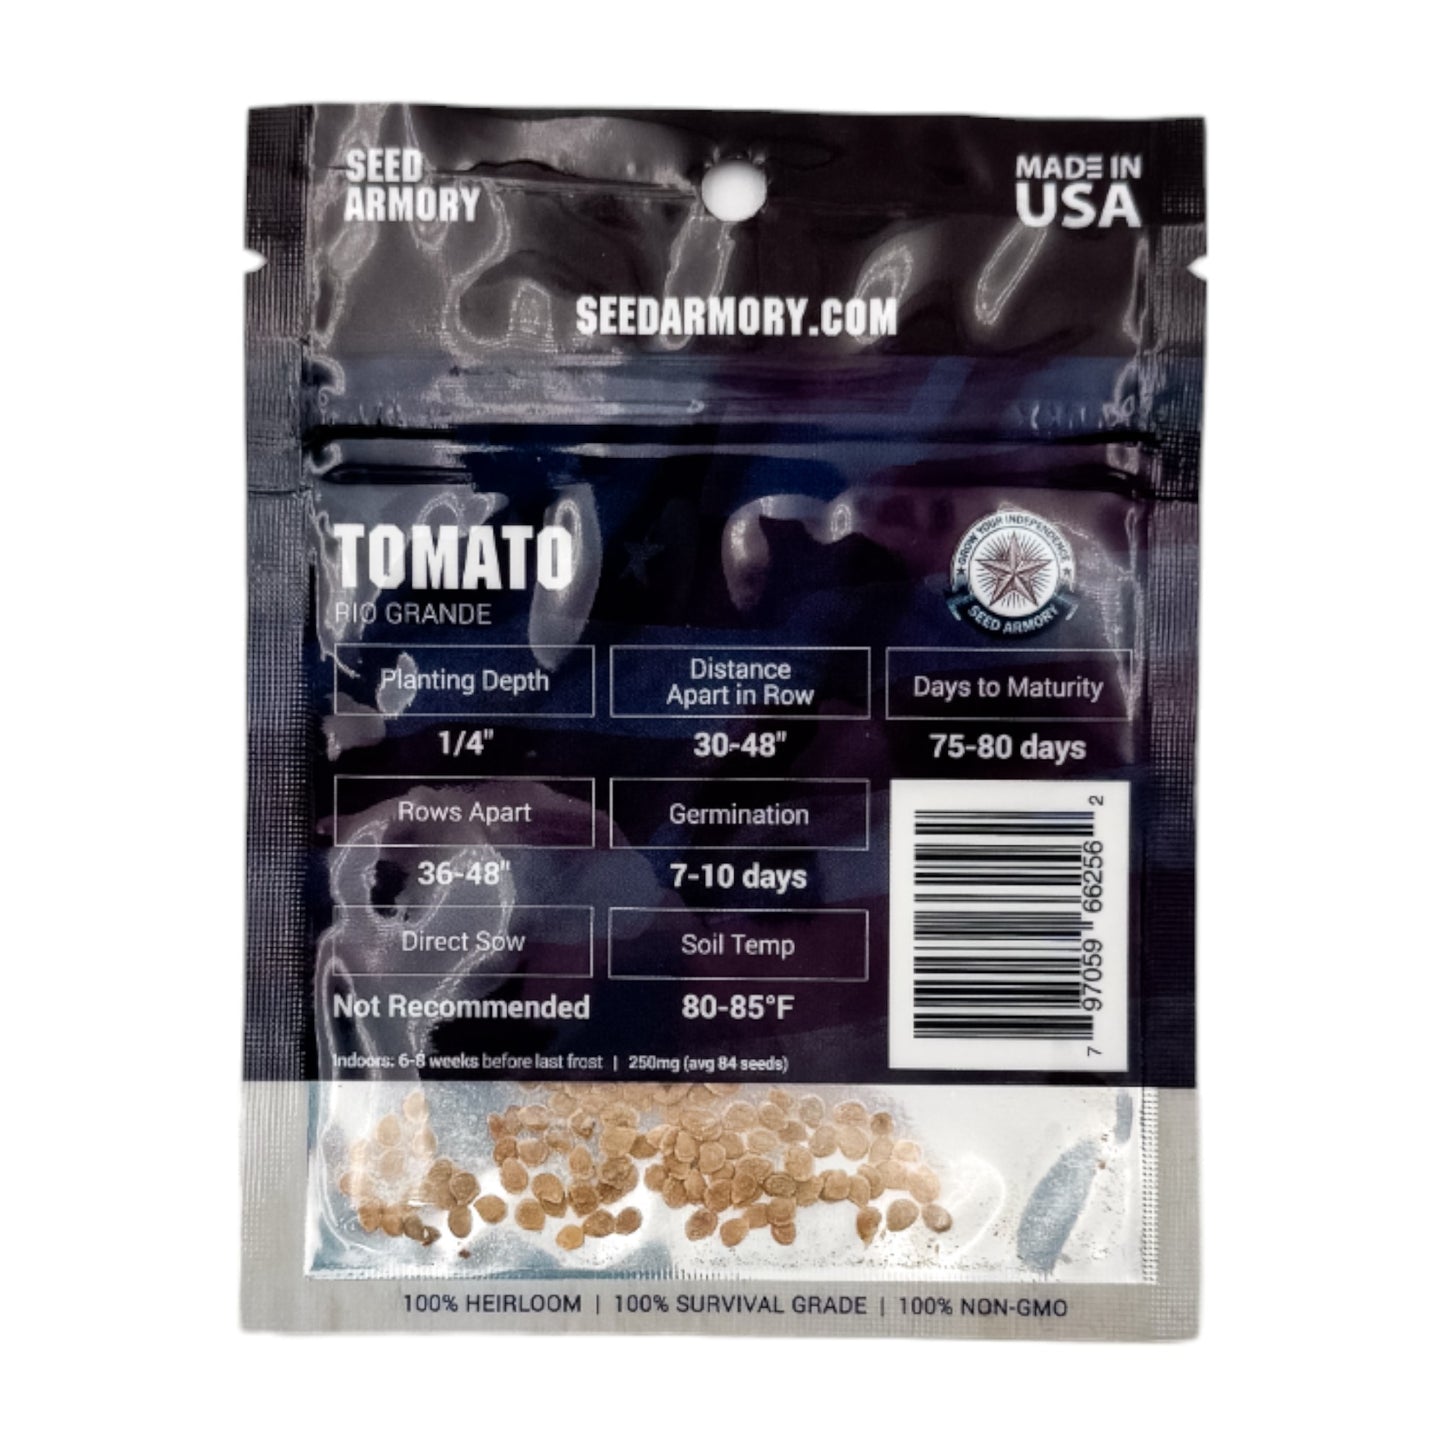 Reverse packet of Rio Grande tomato heirloom seeds with planting instructionst